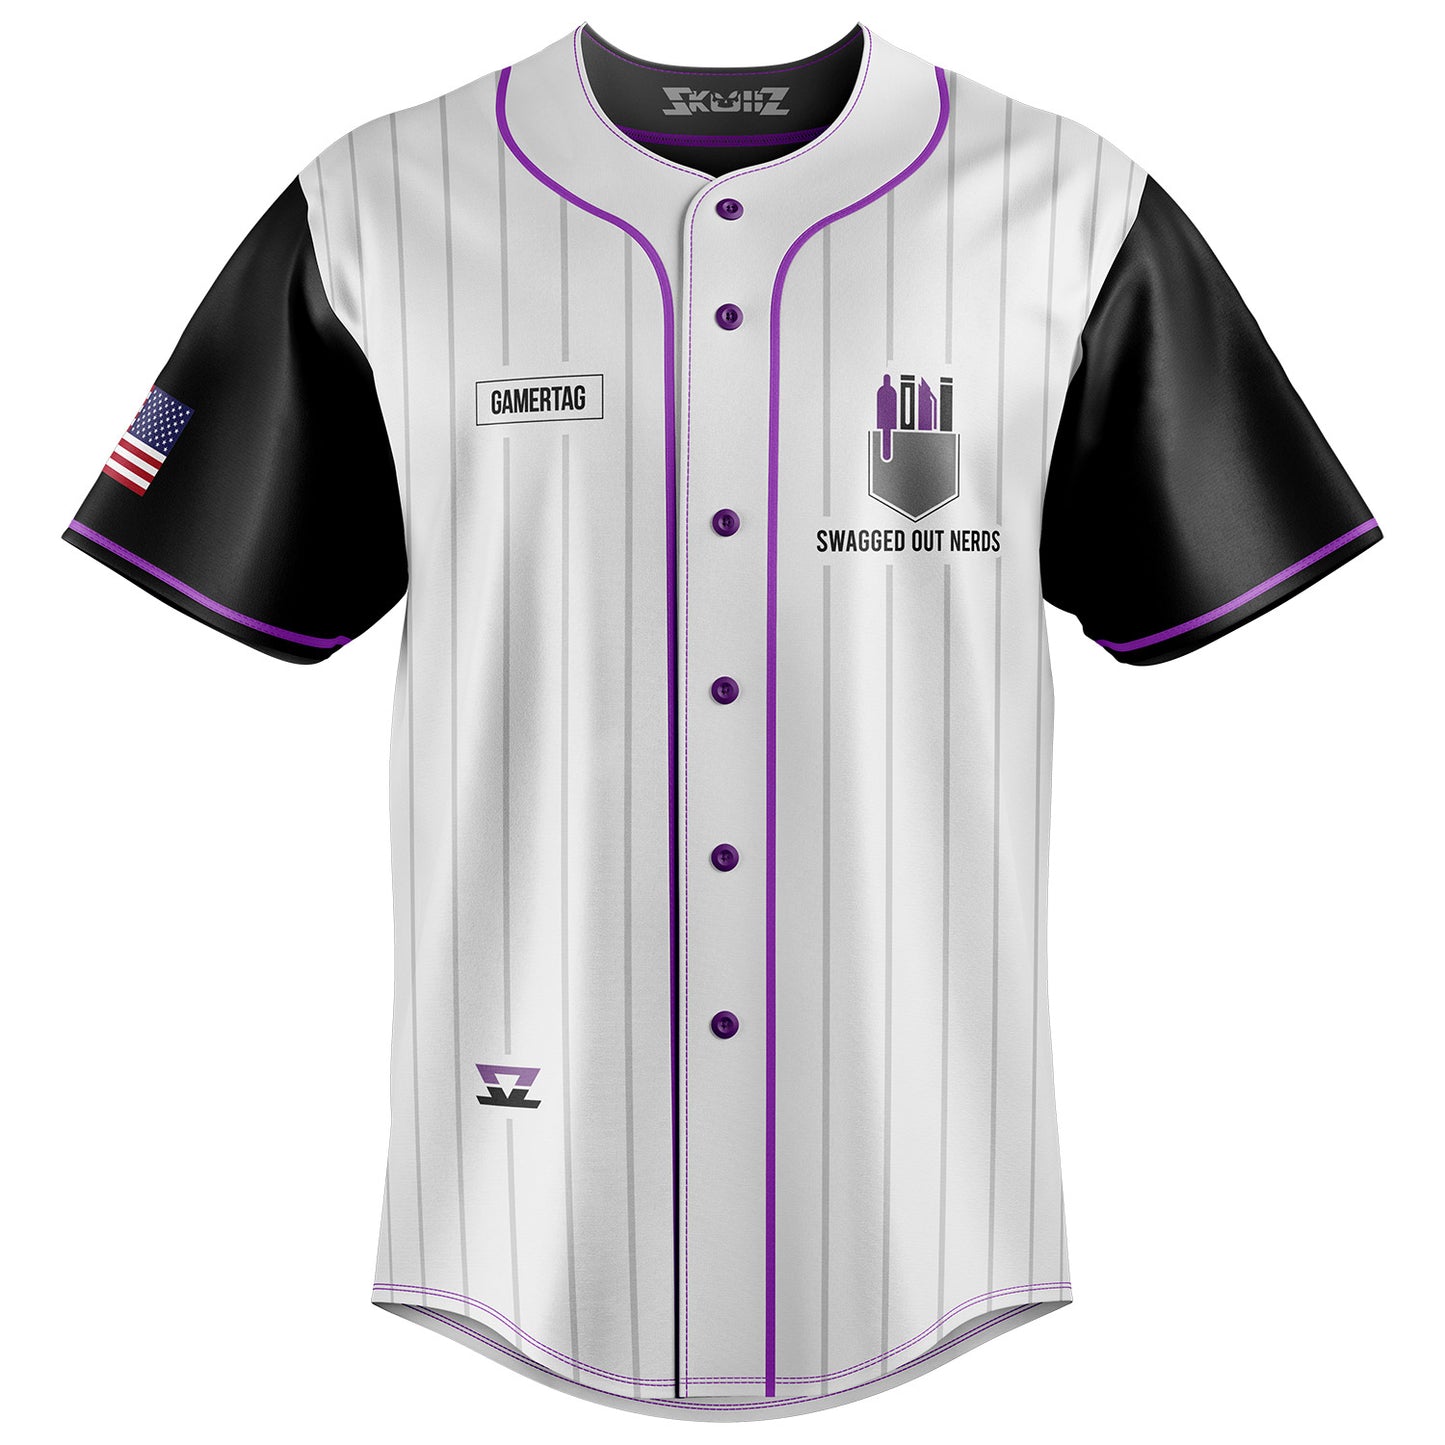 
                  
                    Swagged Out Nerds - PRO Skullz Jersey - White Button Up
                  
                